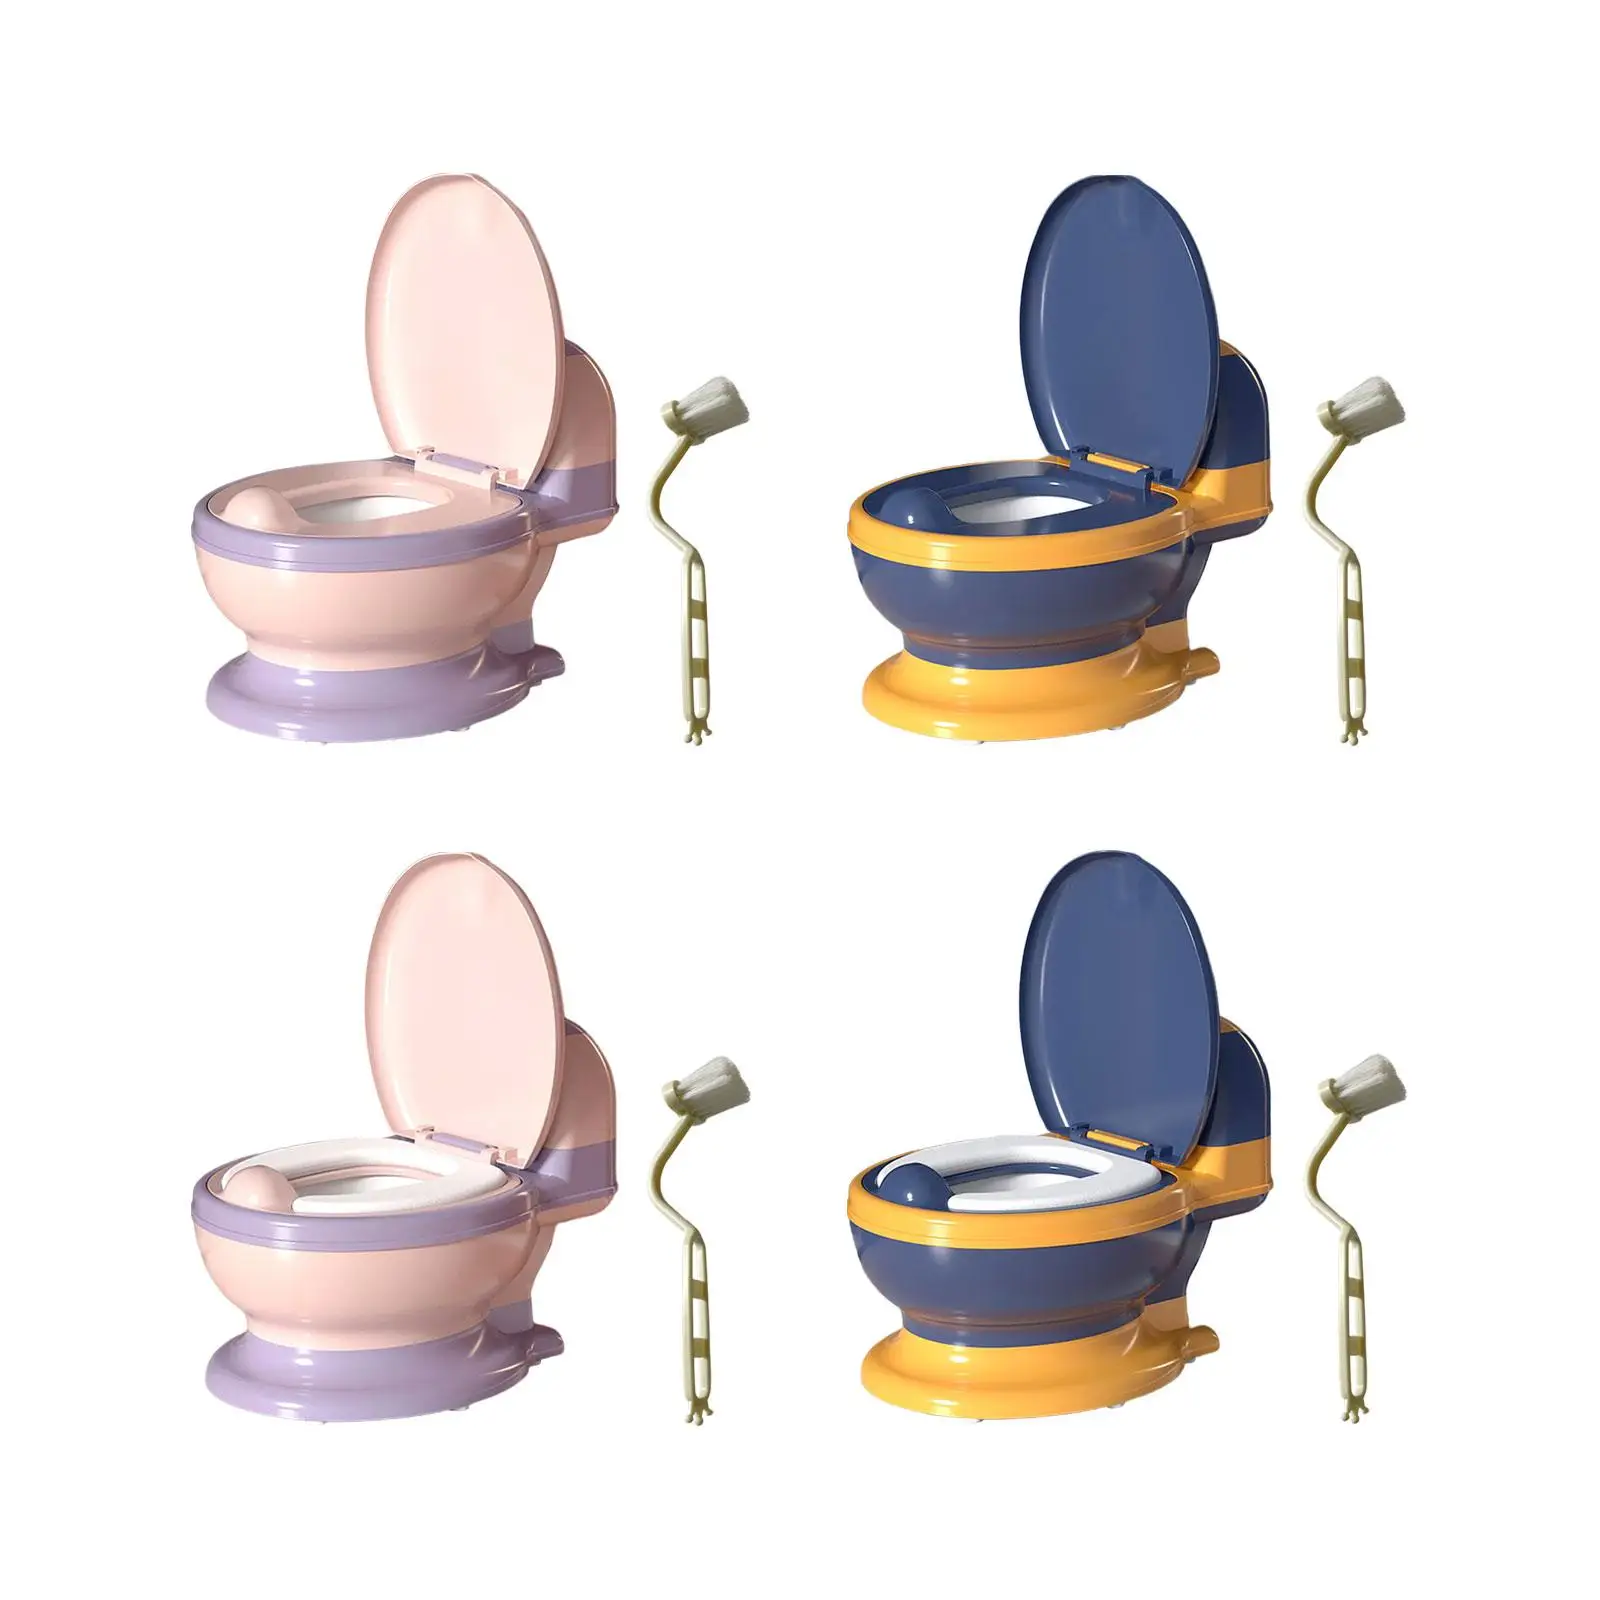 Toilet Training Potty with Wipe Storage Easy to Clean Includes Cleaning Brush Training Transition Potty Seat Realistic Toilet